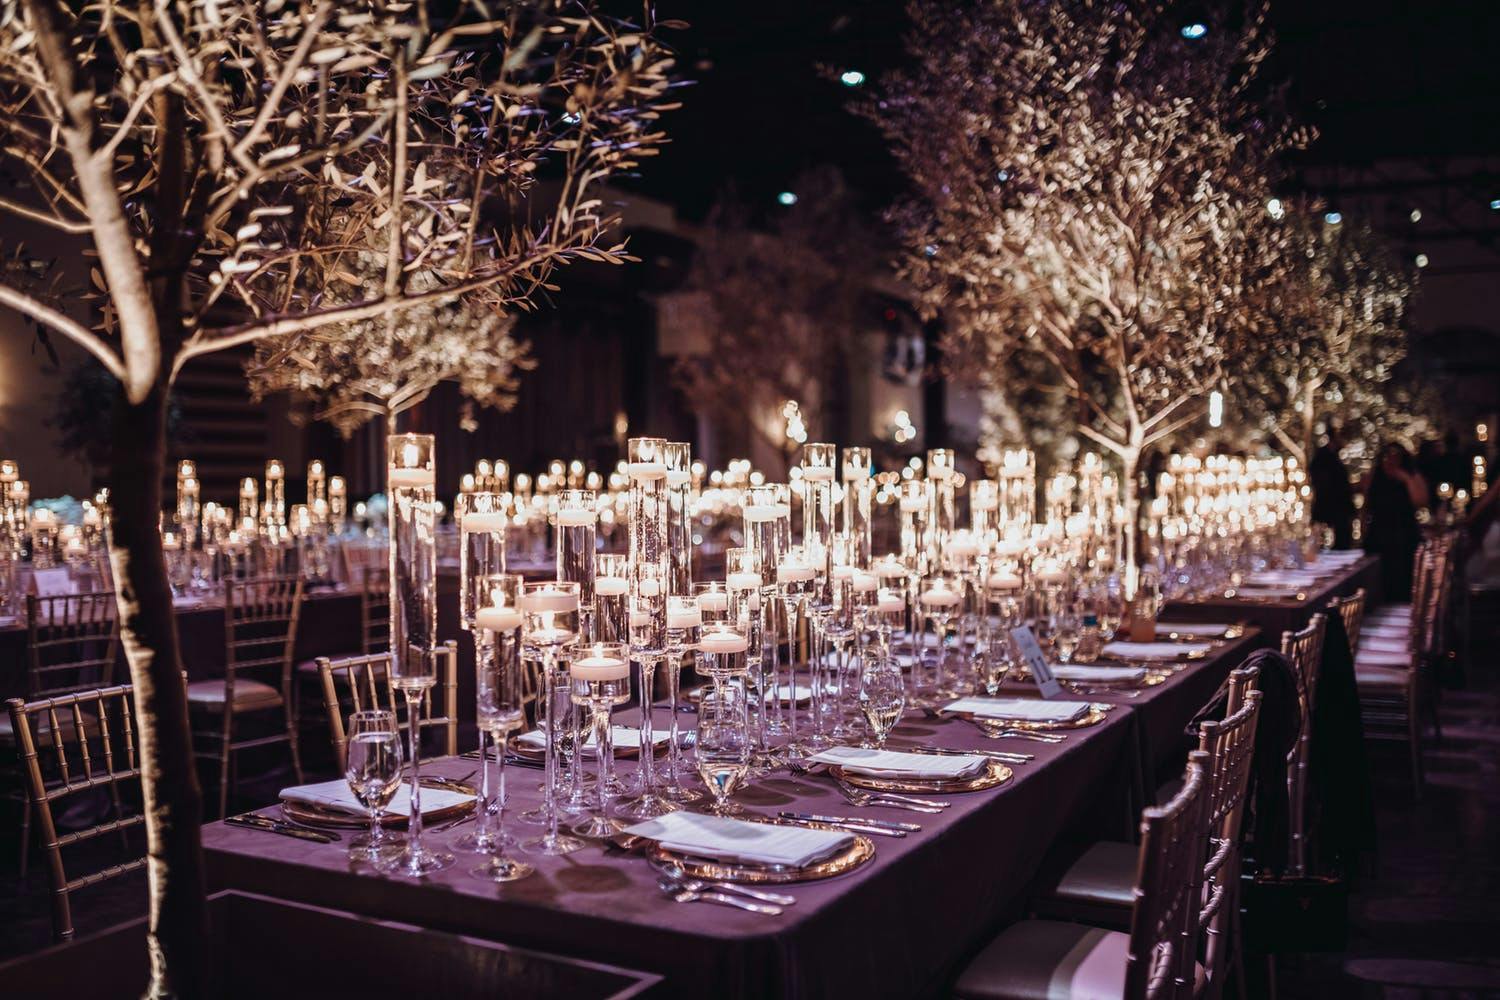 Purple table with candle centerpieces.